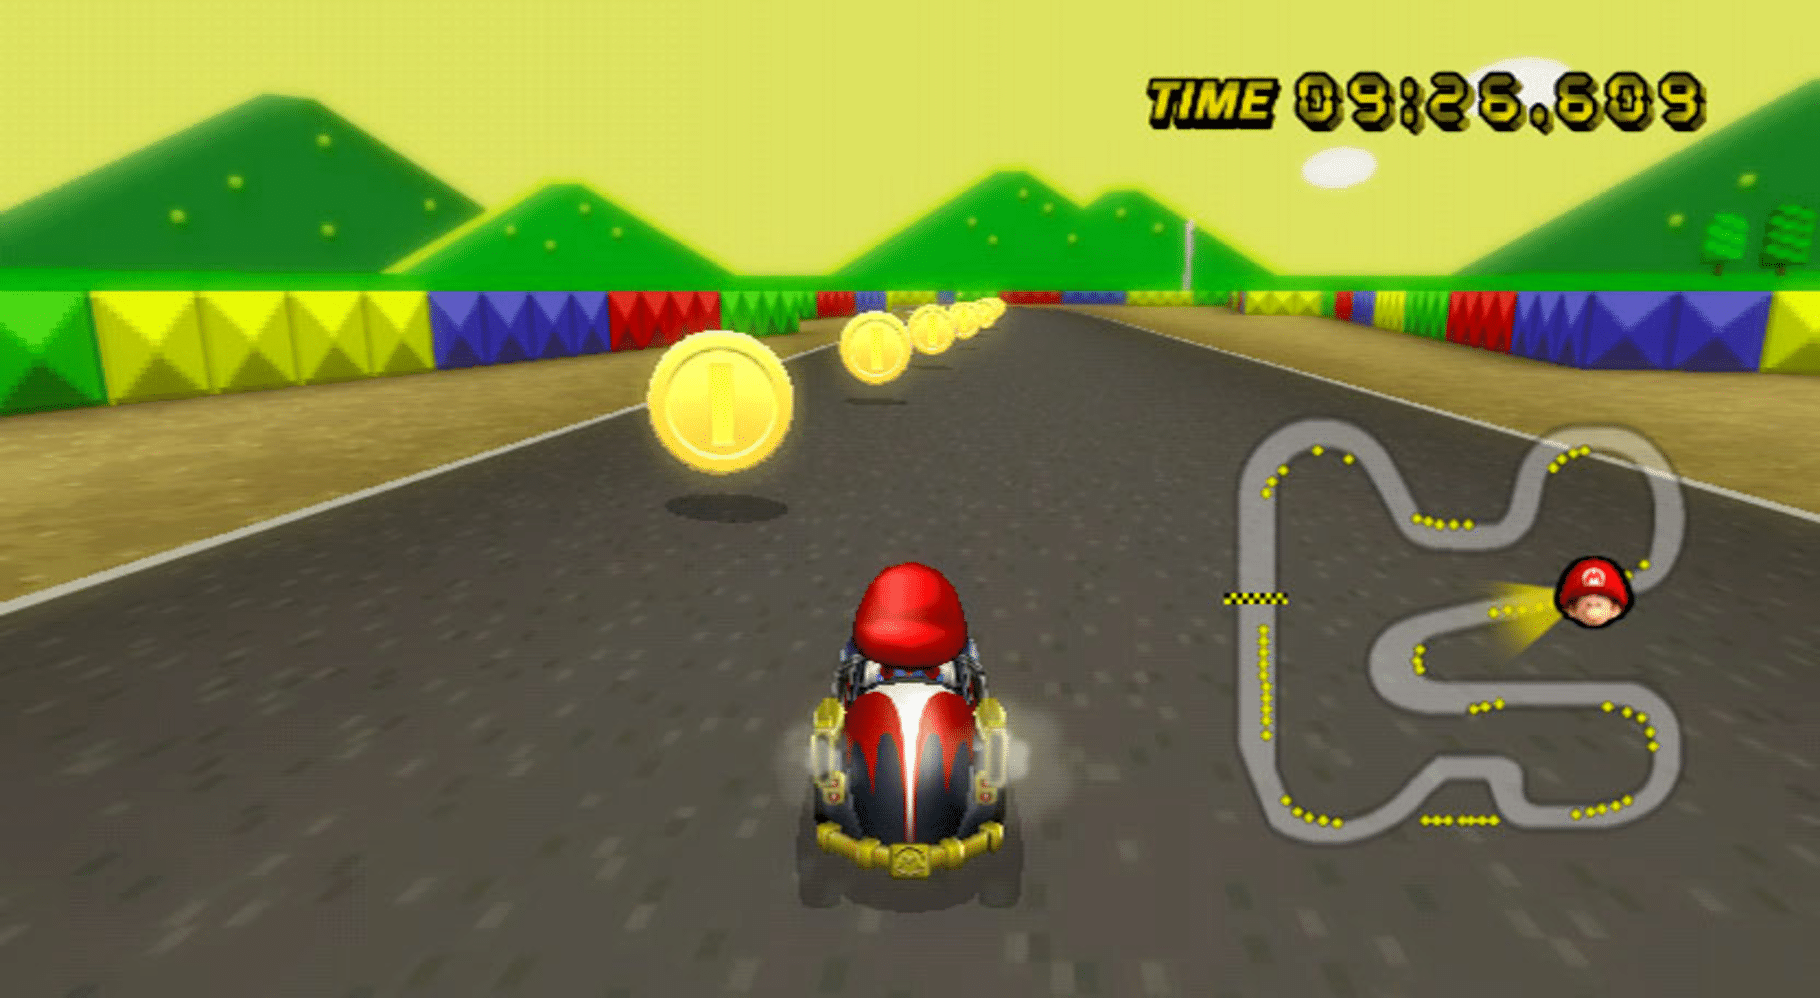 Did You Use Motion Controls In Mario Kart Wii?